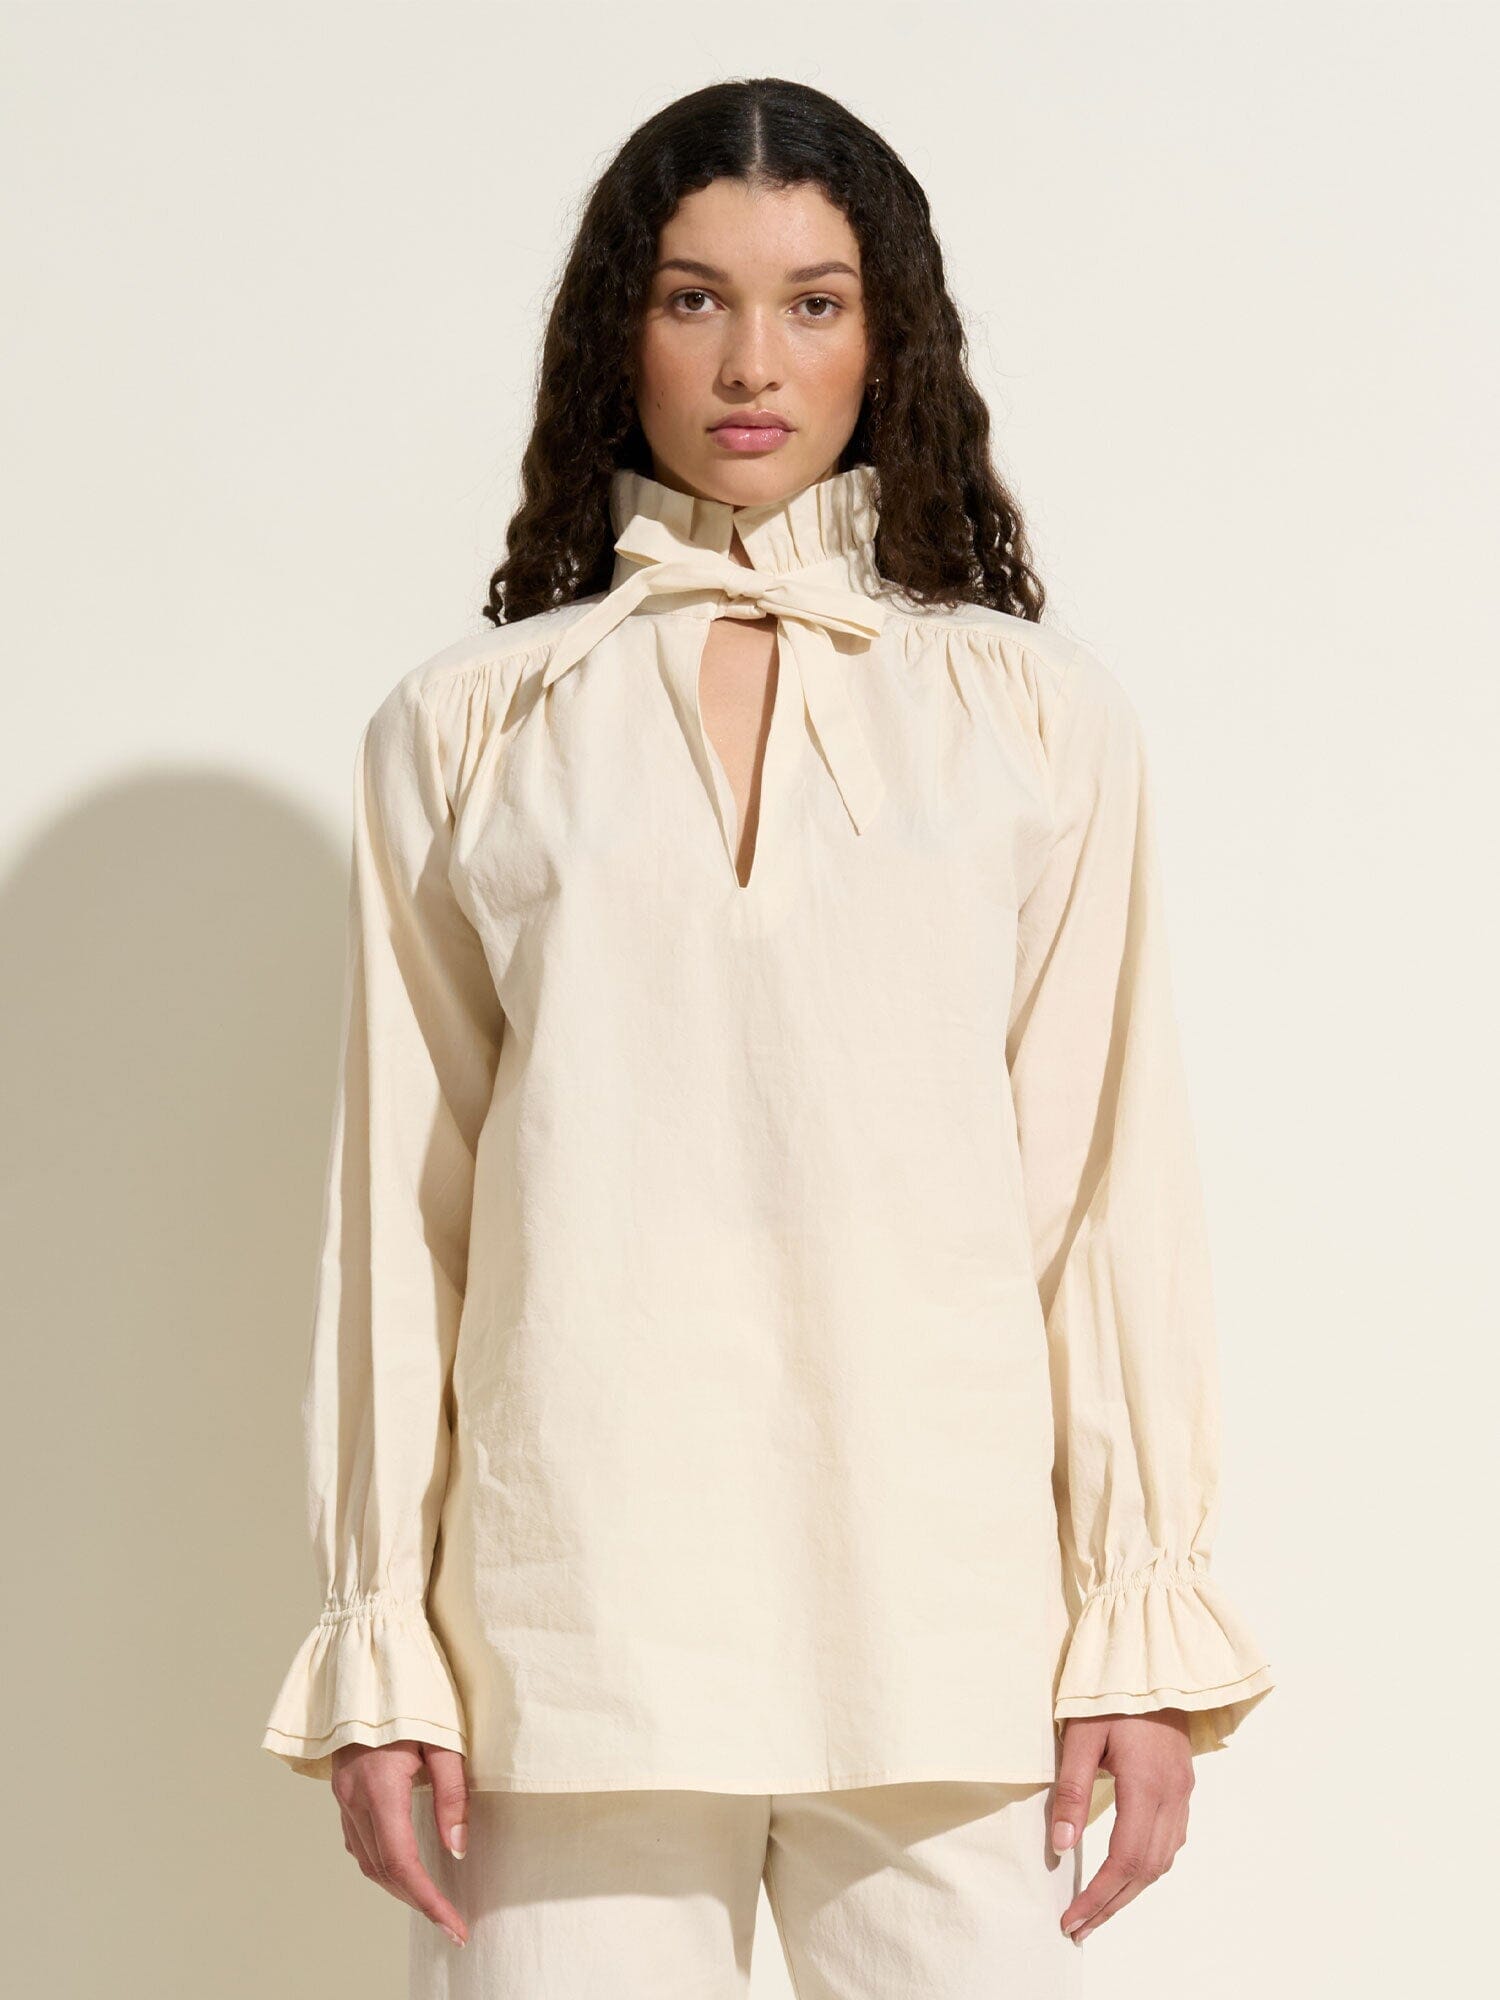 CASTIGLIONE - Shirt with balloon sleeves, high collar, tie fastening in crinkled Ecru Cotton Shirt Fête Impériale